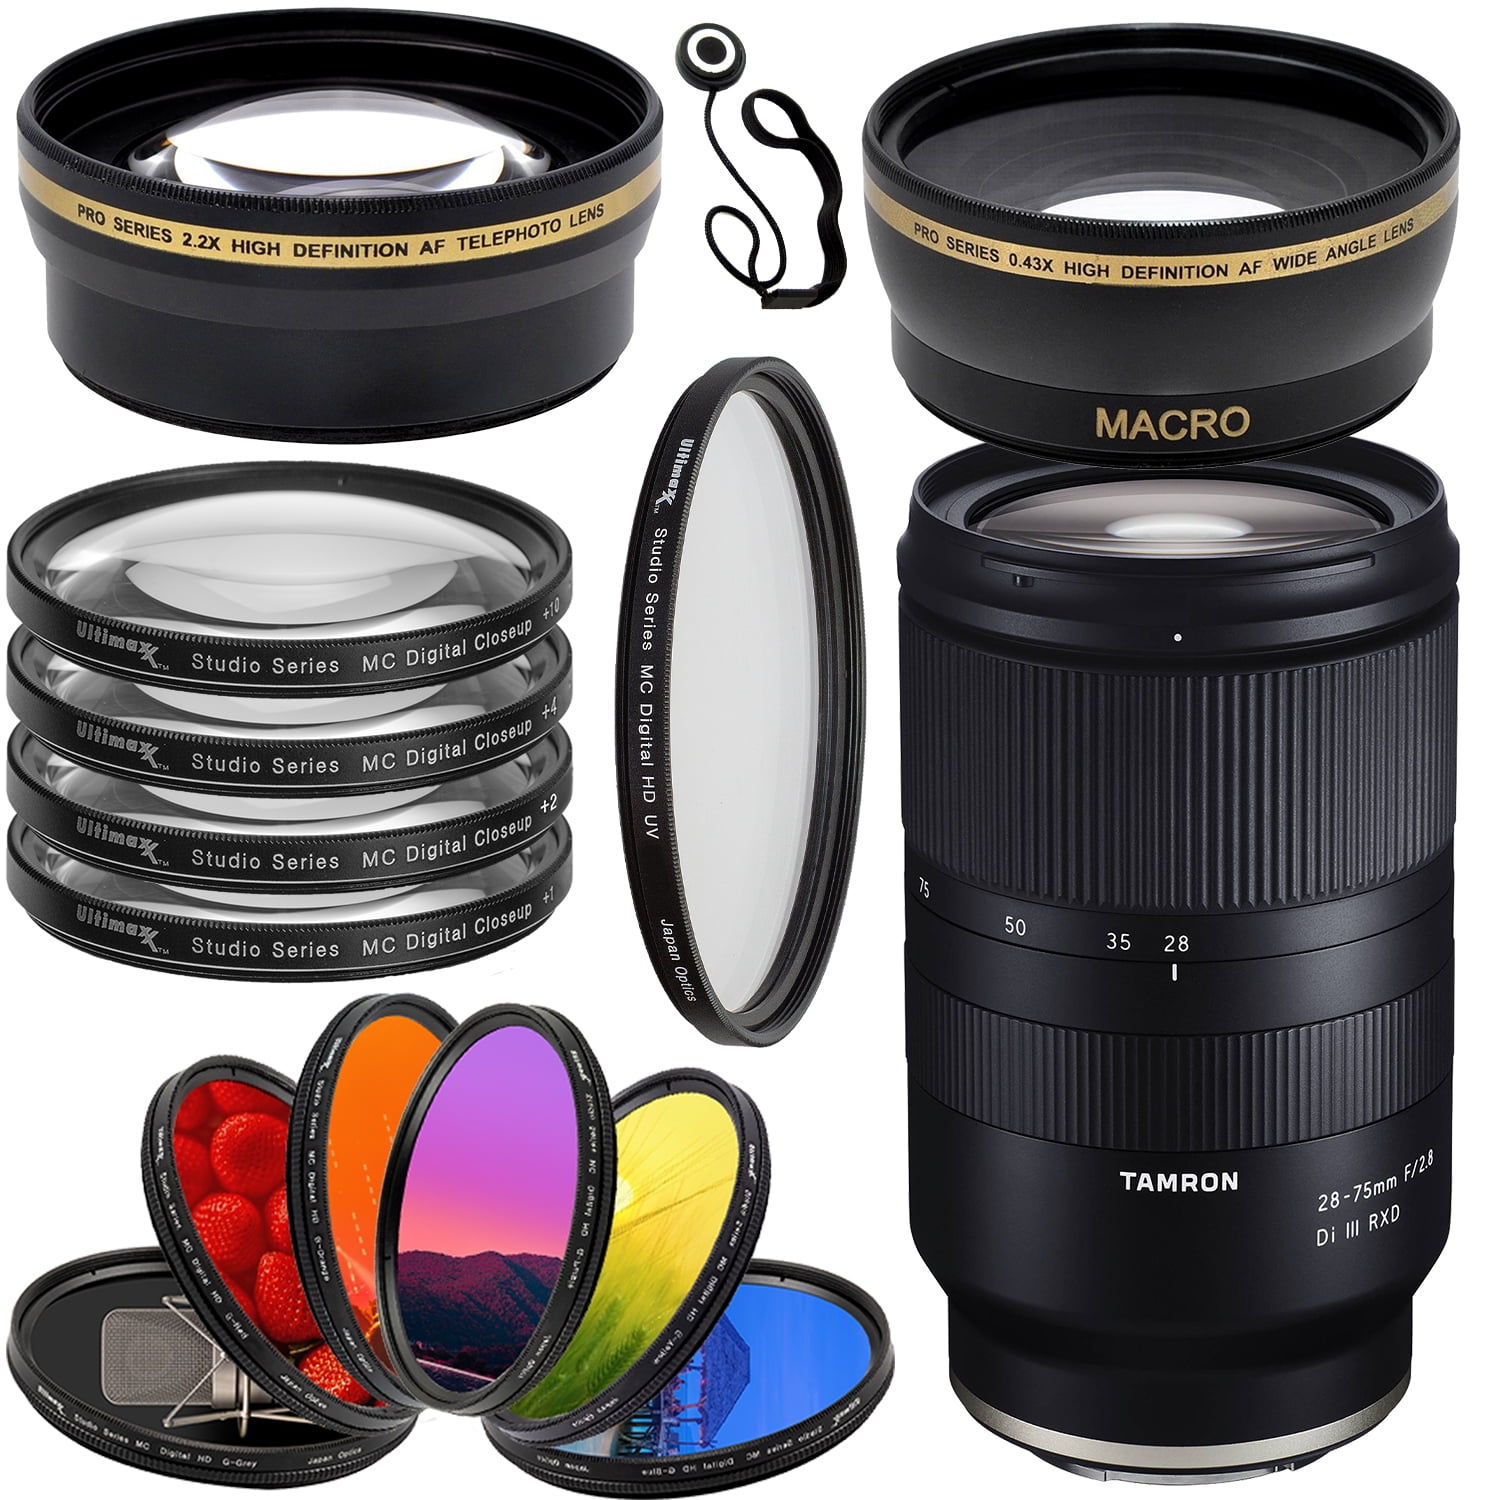 Tamron Tamron 28-75mm f/2.8 Di III VXD G2 Lens for Sony E with Accessories  Kit